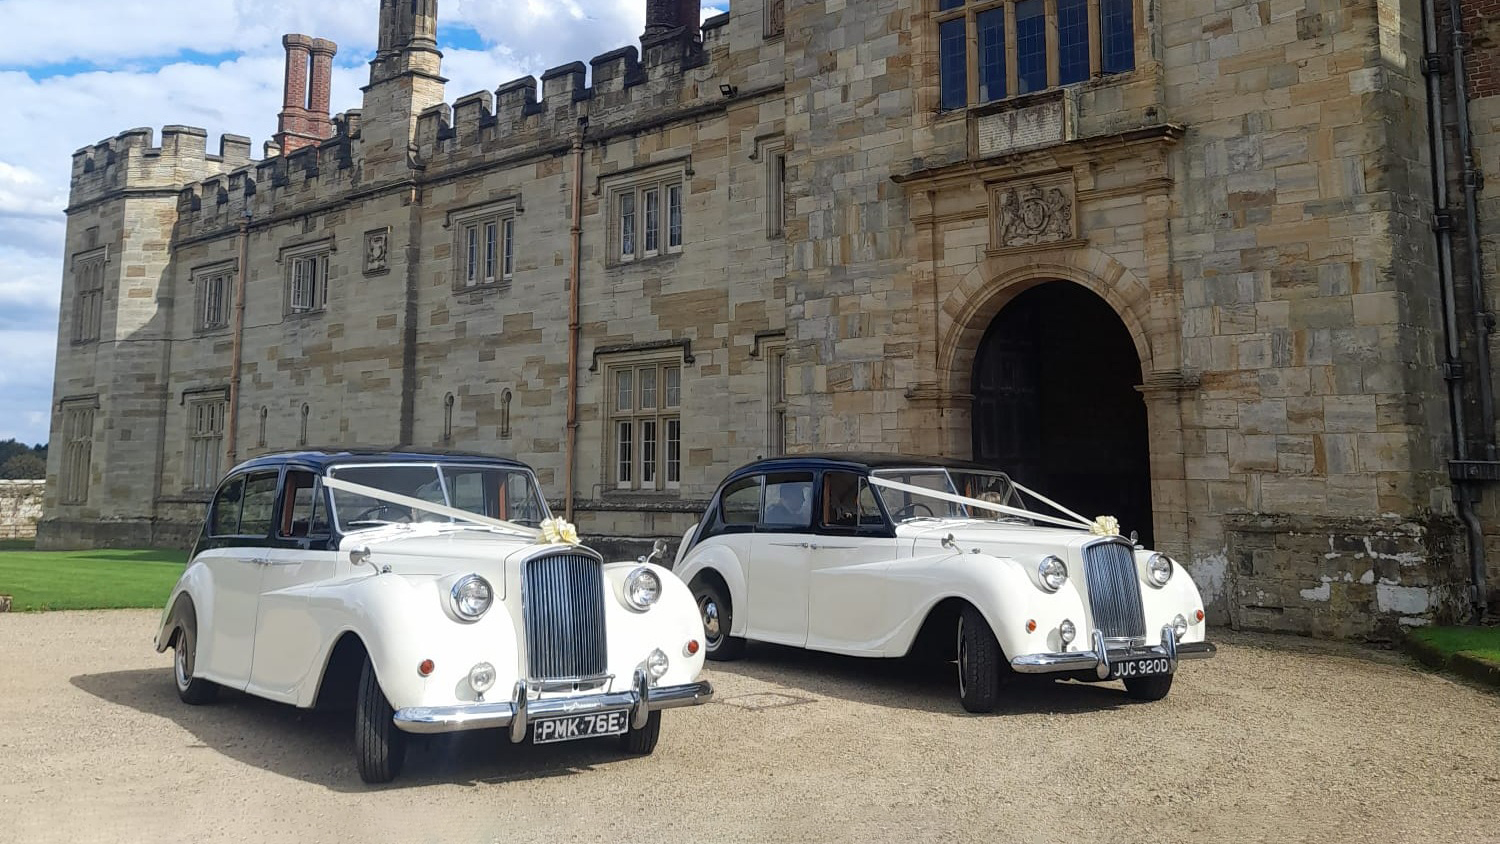 Two Classic Austin Princess Limousine decorated with Ivory Ribbons and Bows on top of the front grill. Vehicles are parked in front of a large manor house in Dartford